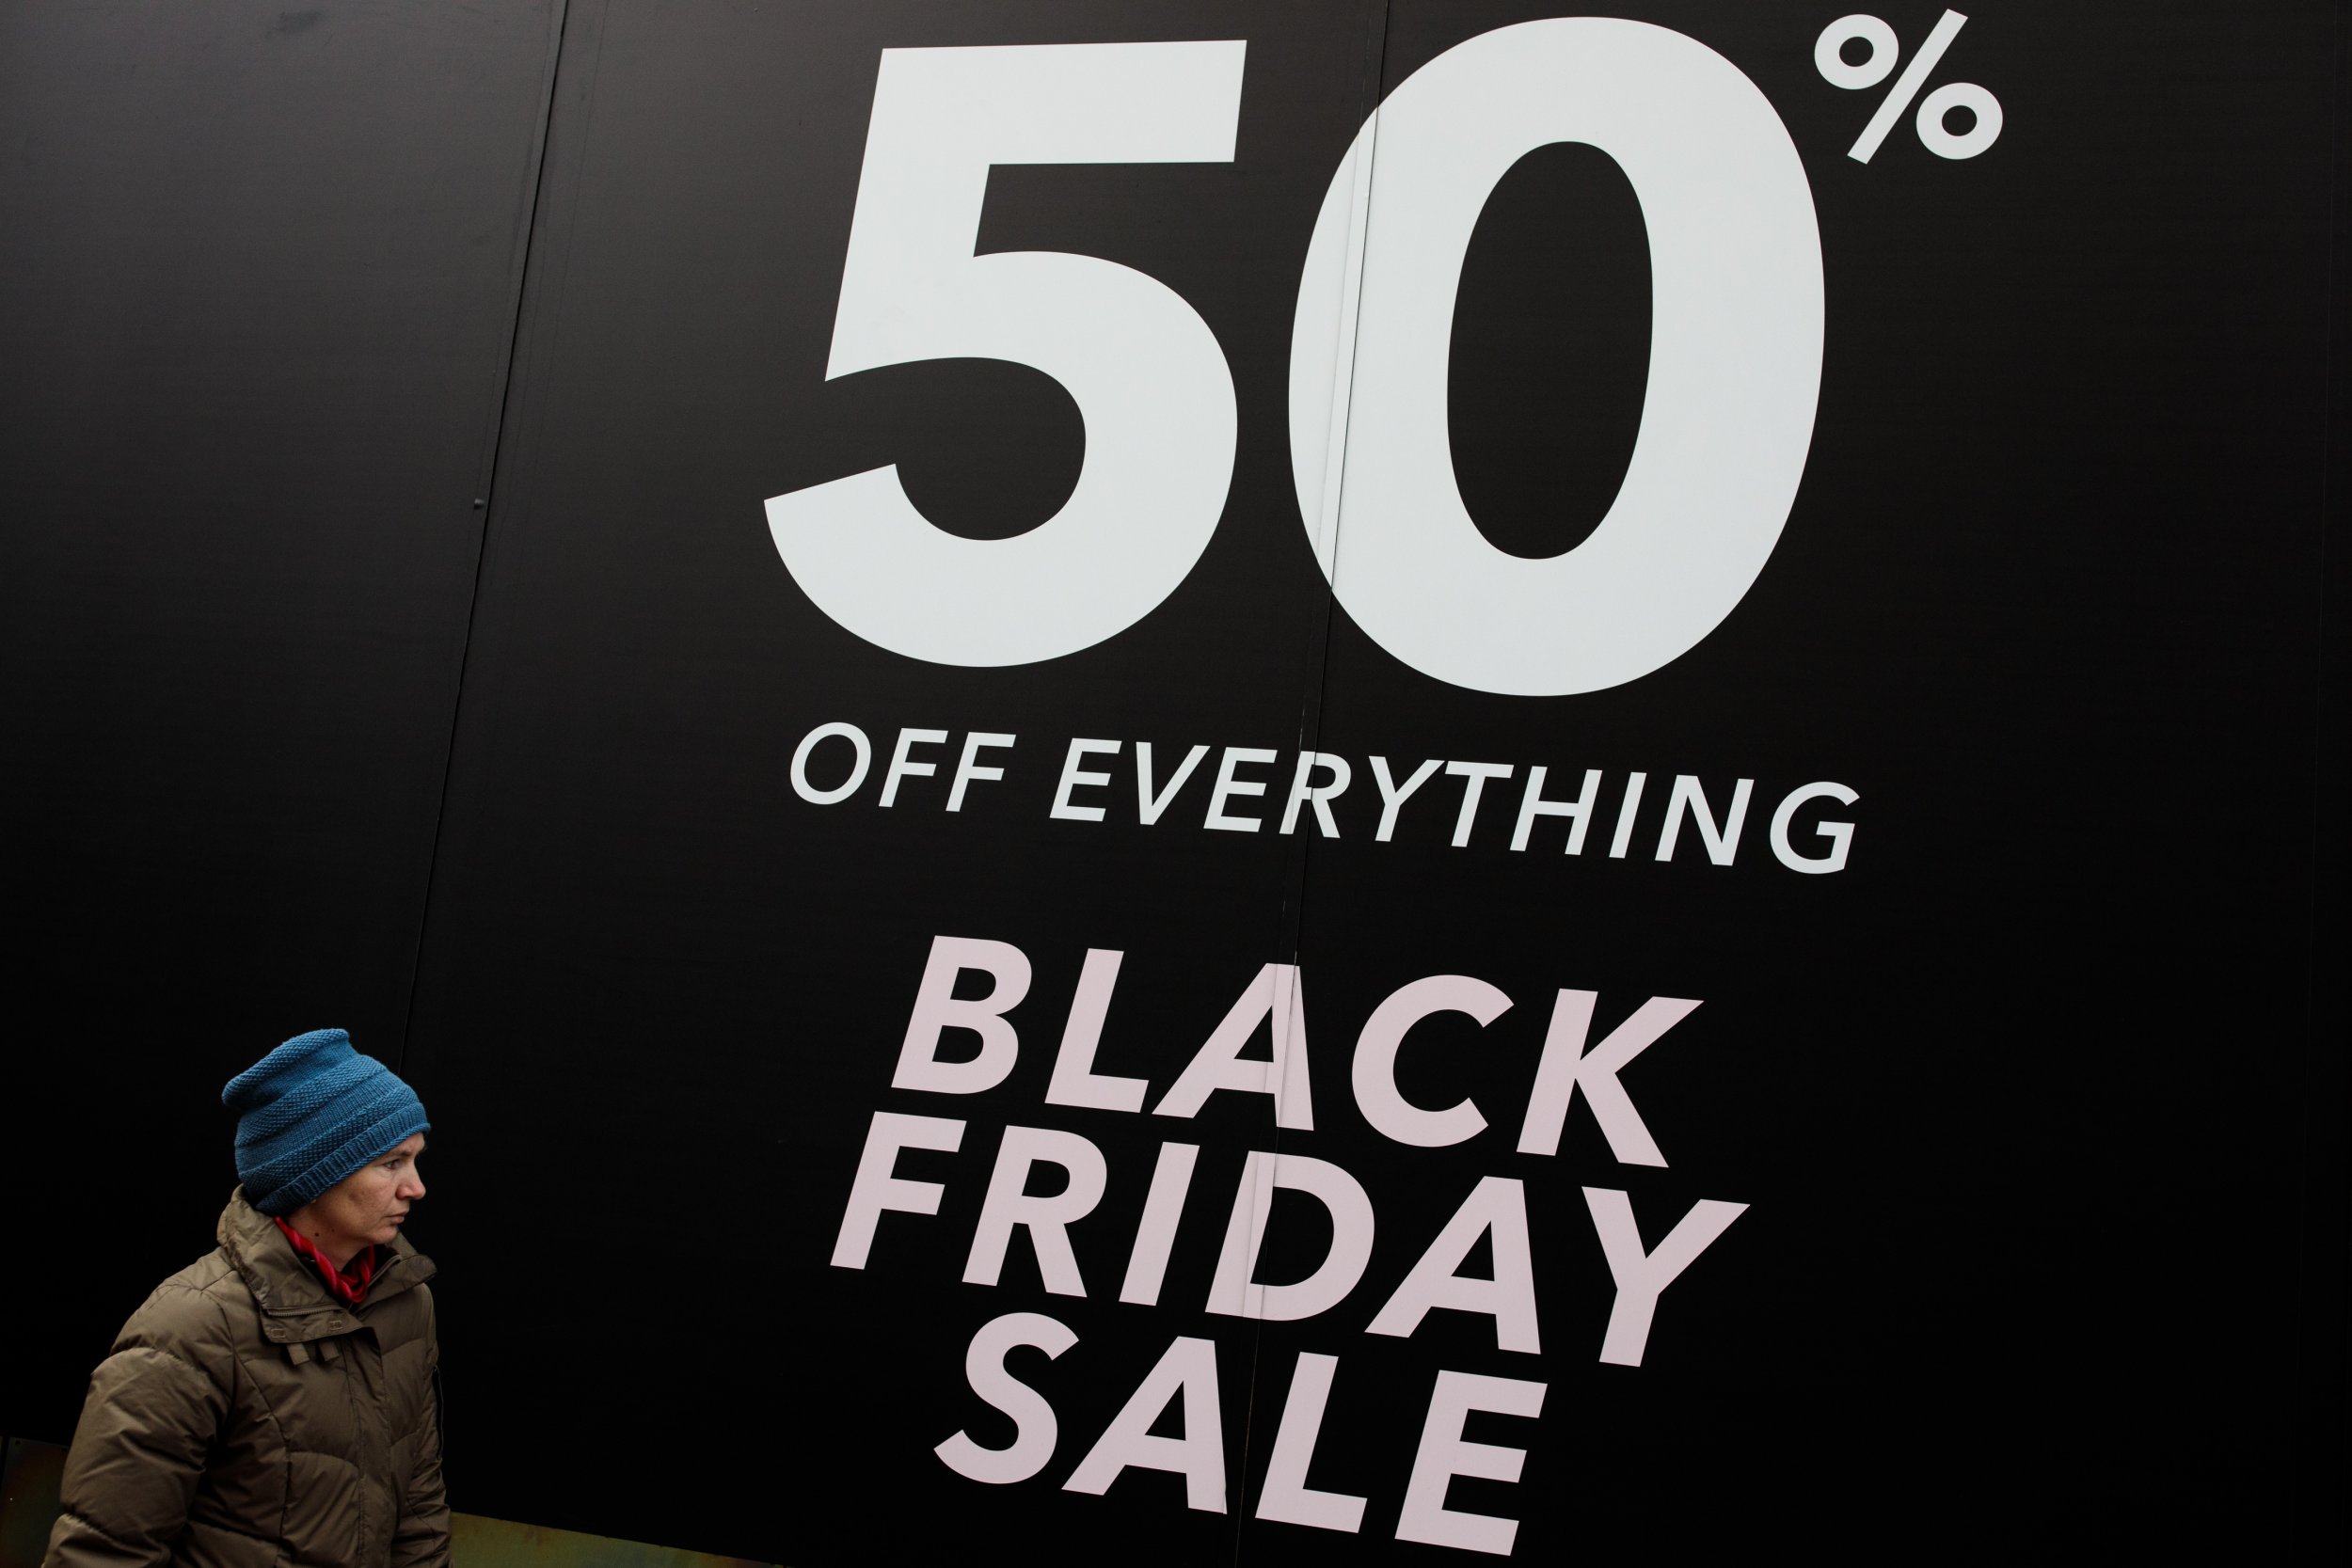 Why Is It Called Black Friday, Cyber Monday? When Are They in 2018? - What Is The Sale Day After Black Friday Called